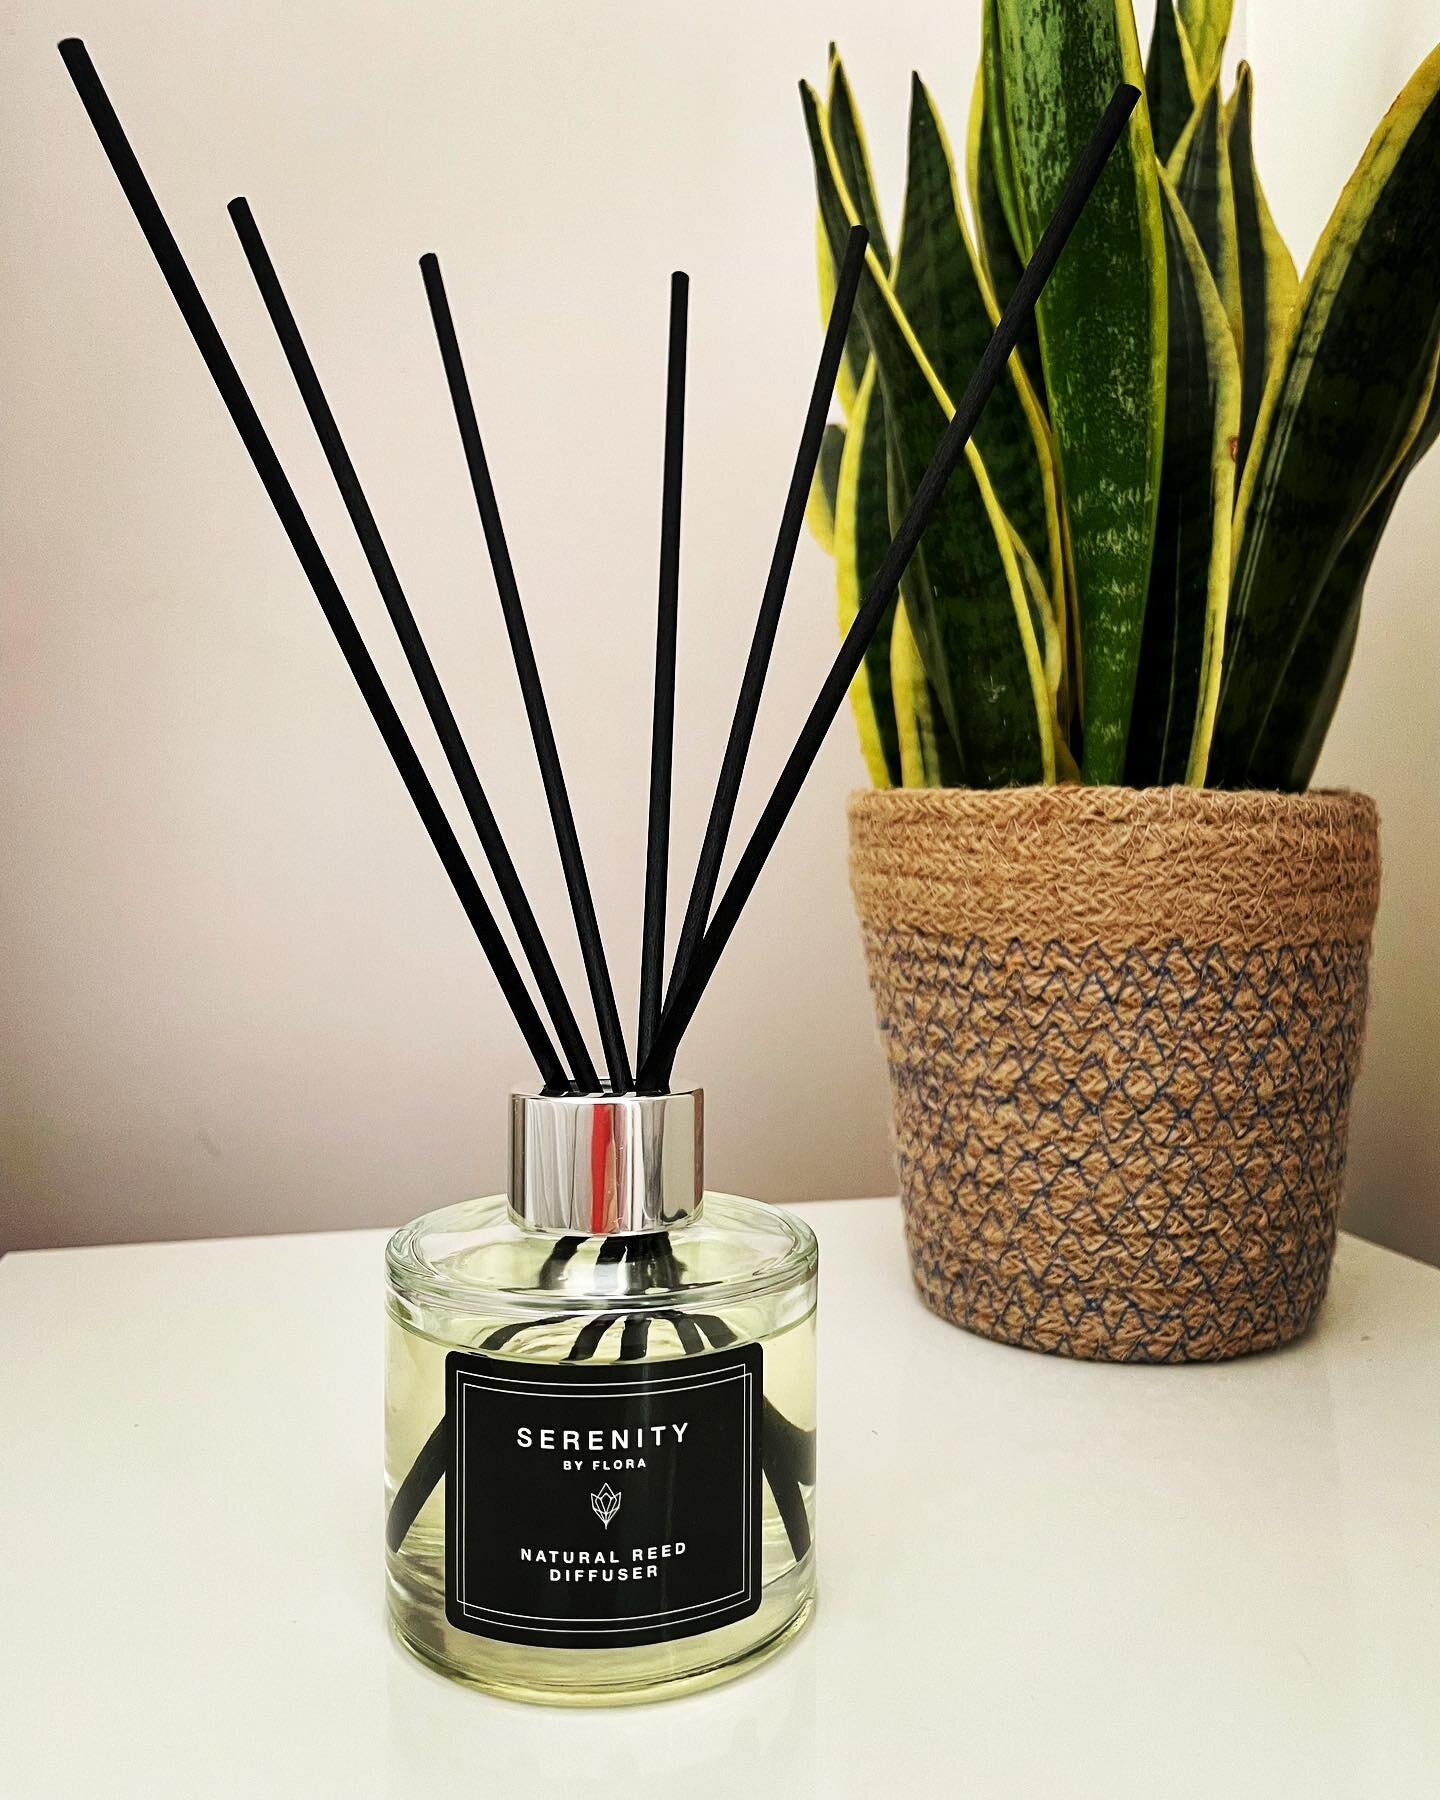 Our Reed Duffusers are ideal to have in your bedroom 🌱 Made with vegan  diffuser base and natural fragrance oils, they are free from chemicals and toxins&hellip;🌱 

Discover more at www.serenitybyflora.com and www.etsy.com/uk/shop/Serenitybyflora

